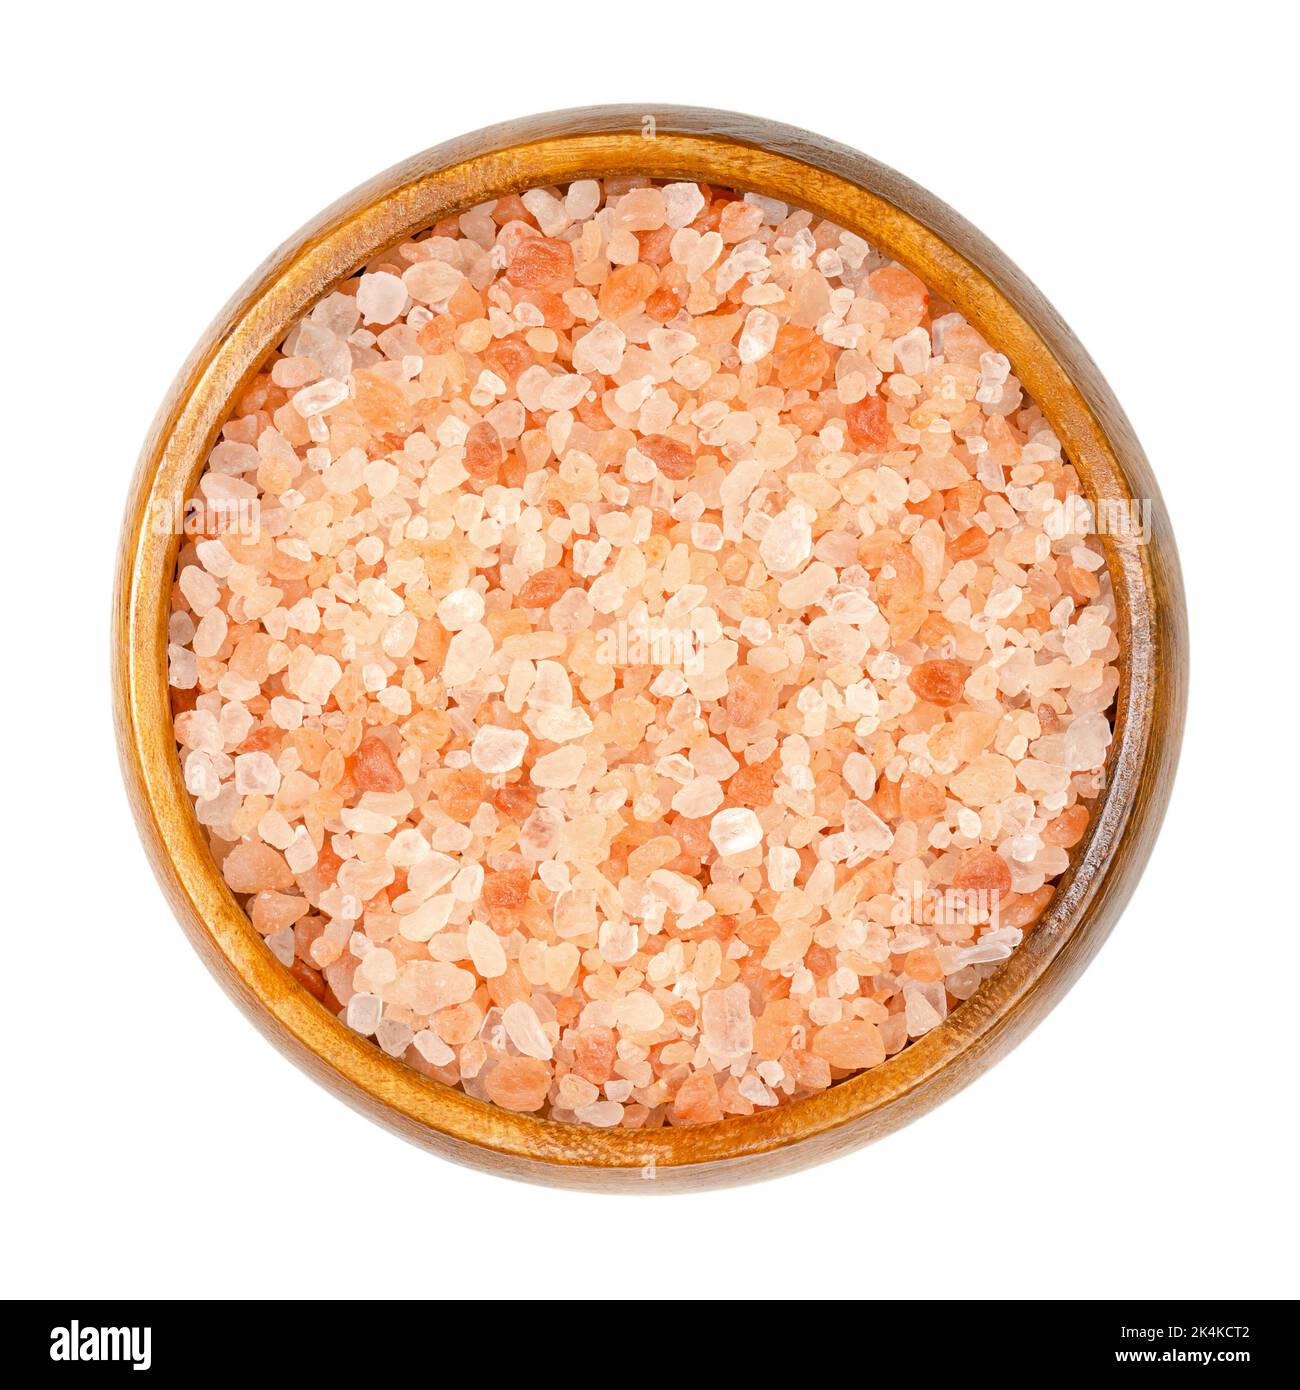 Himalayan salt, coarse crystals, in a wooden bowl. Rock salt, halite, with a pinkish tint, due to trace minerals, mined from the Punjab region. Stock Photo